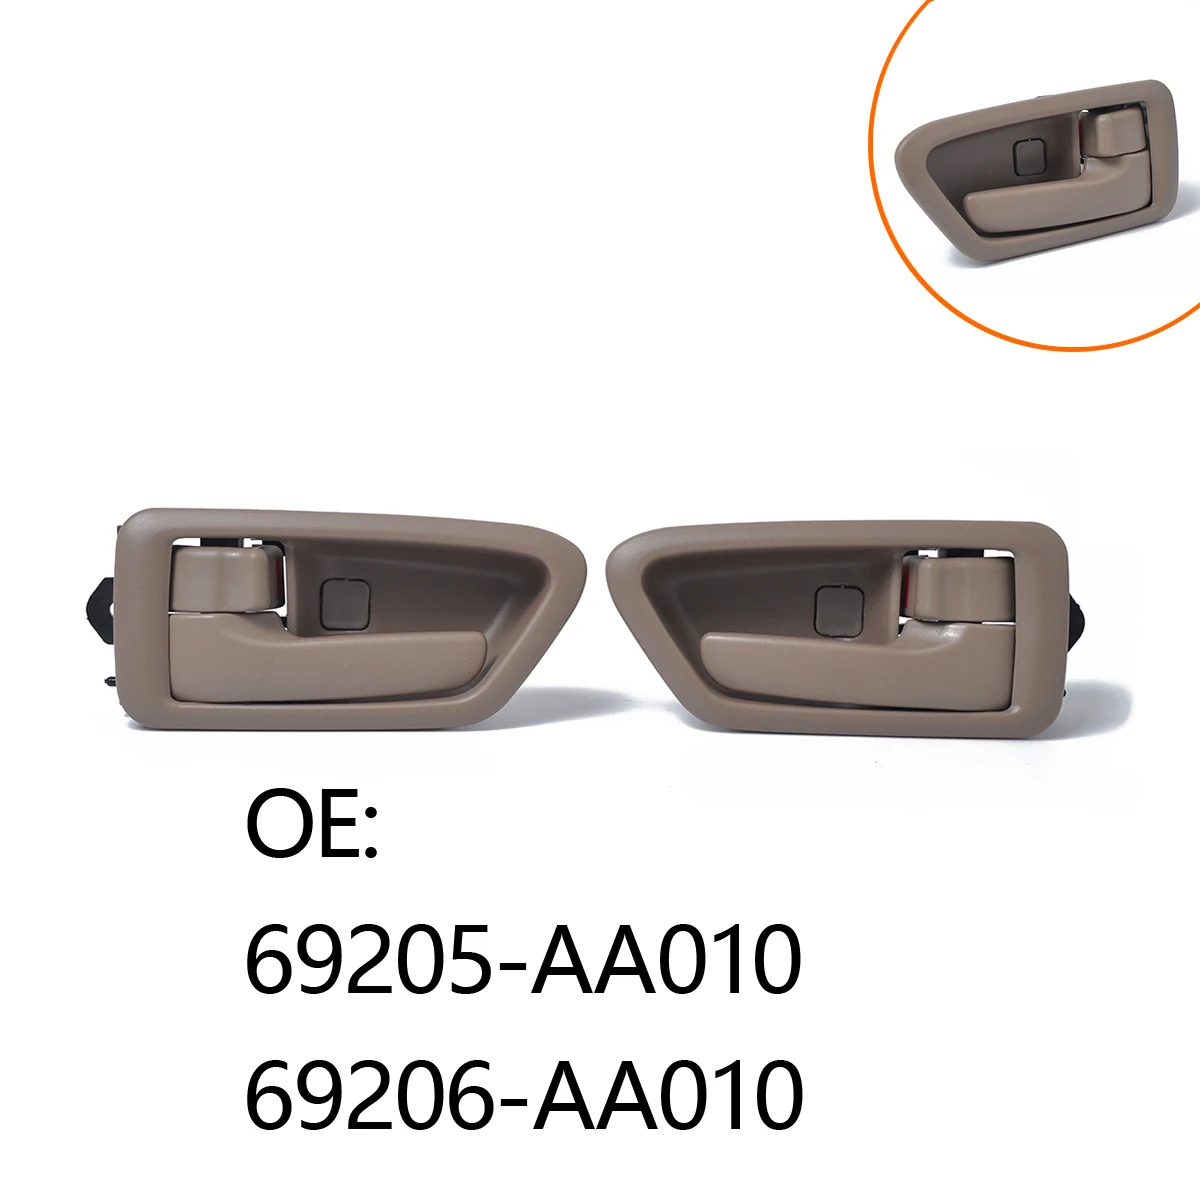 

New Front Inside Inner Door Handles Left 69206-AA010 & Right 69205-AA010 (LH/RH) PAIR for 97-01 Toyota Camry with Bezel